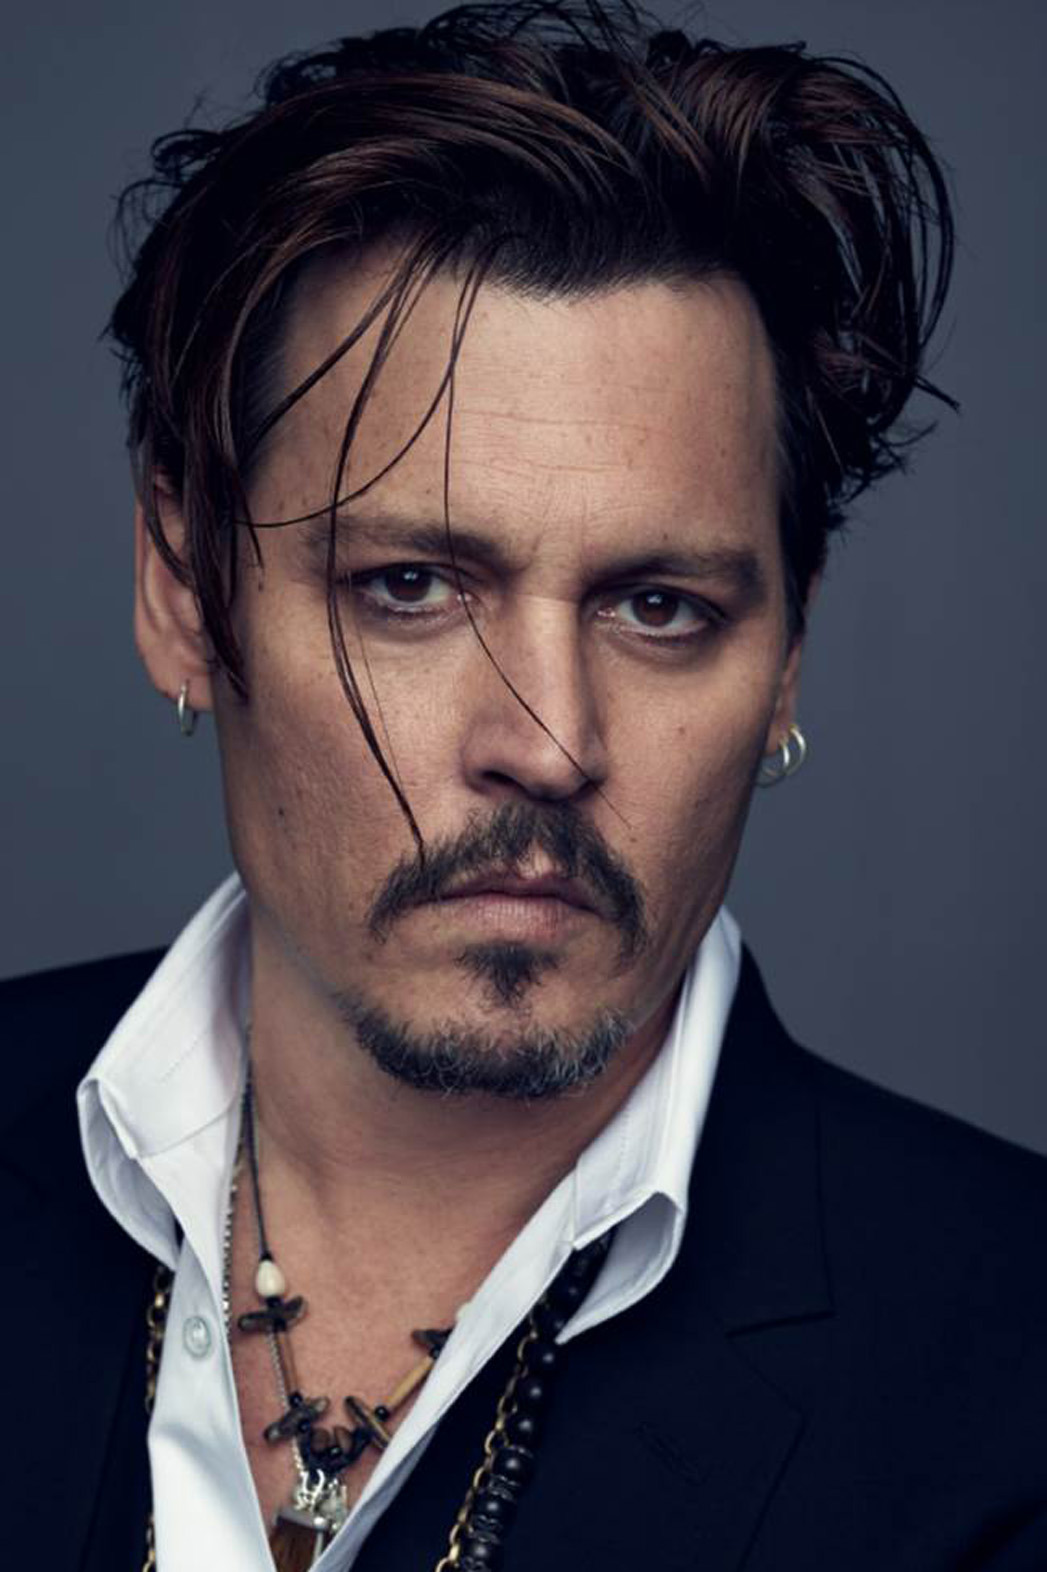 Johnny Depp's Top 5 Hairstyles